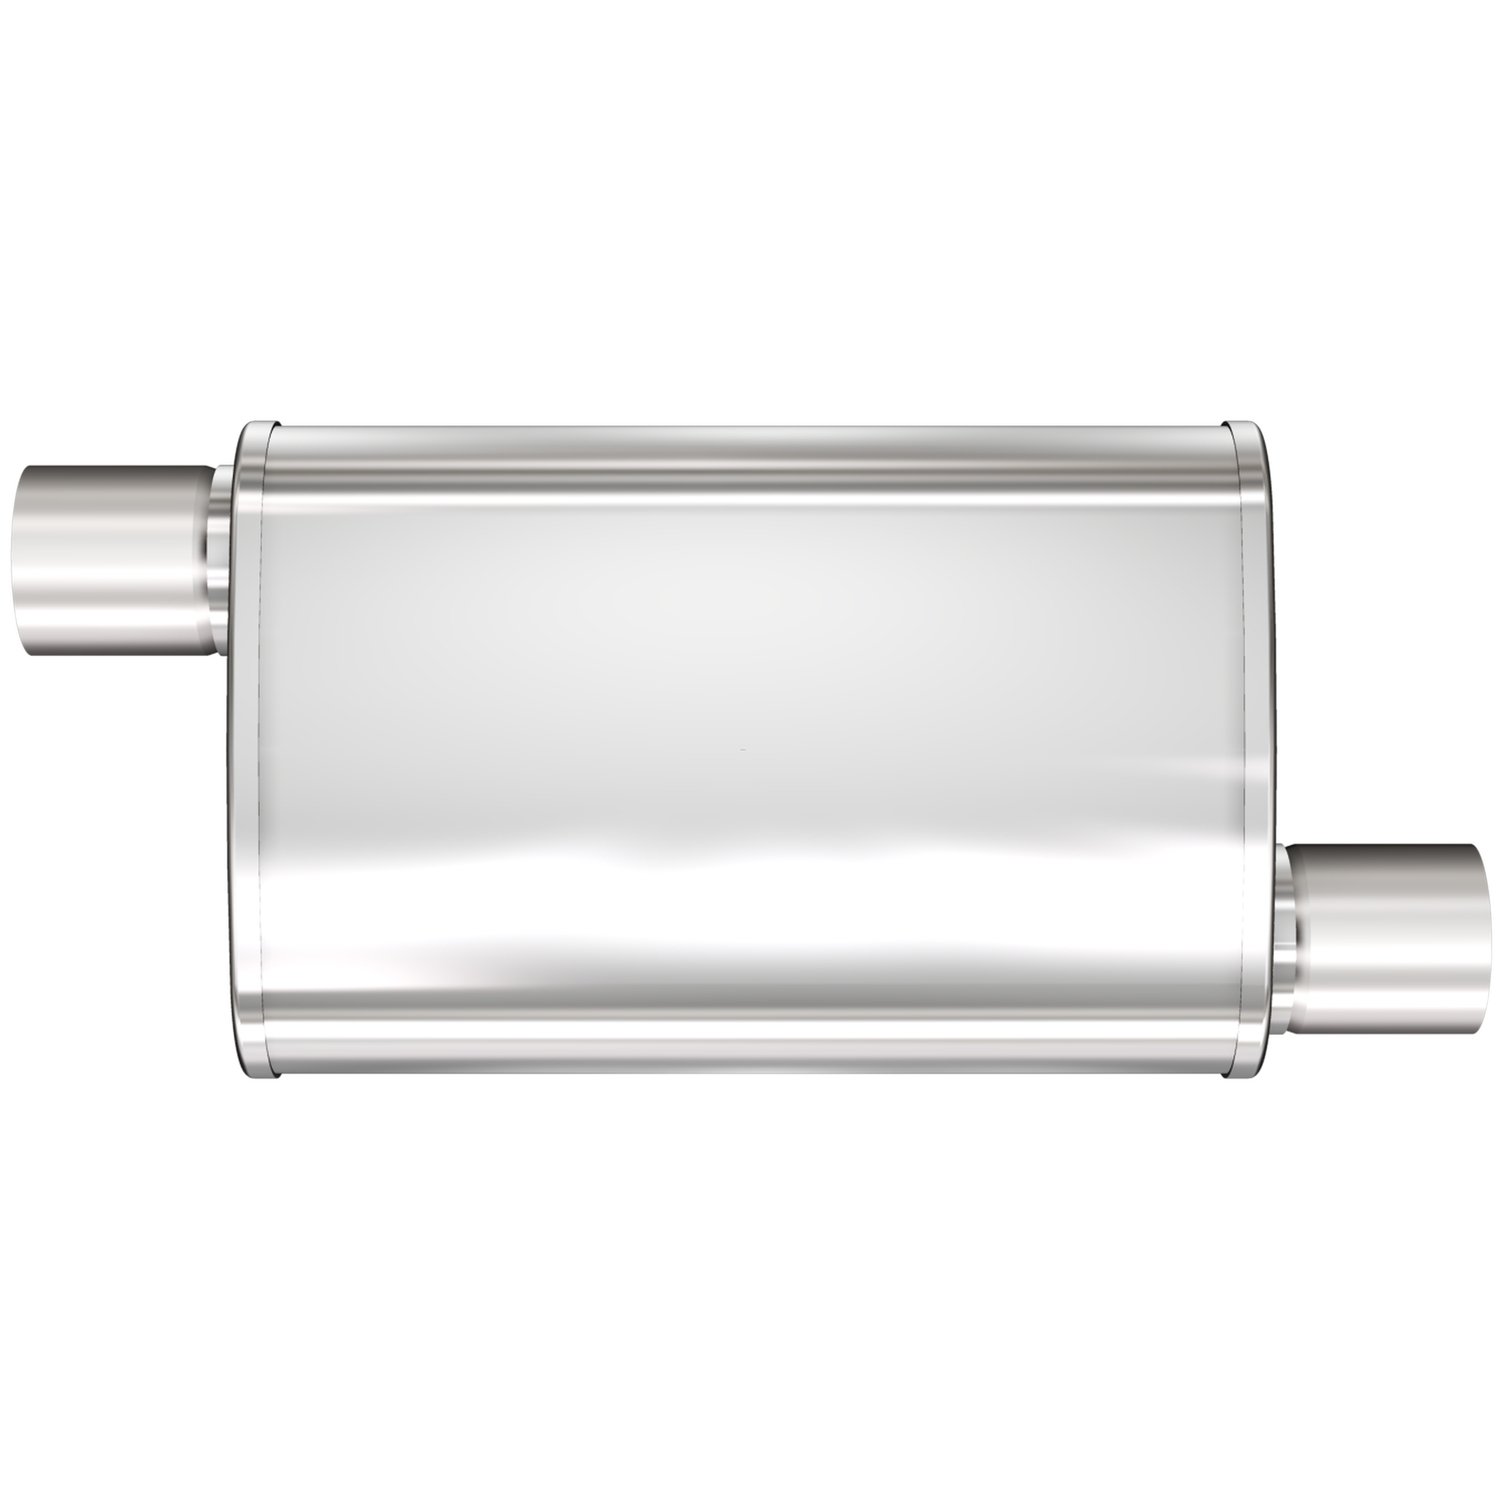 4" x 9" Oval XL 3-Chamber Muffler Offset In/Offset Out: 2"/2" Body Length: 14" Overall Length: 20" Satin Finish